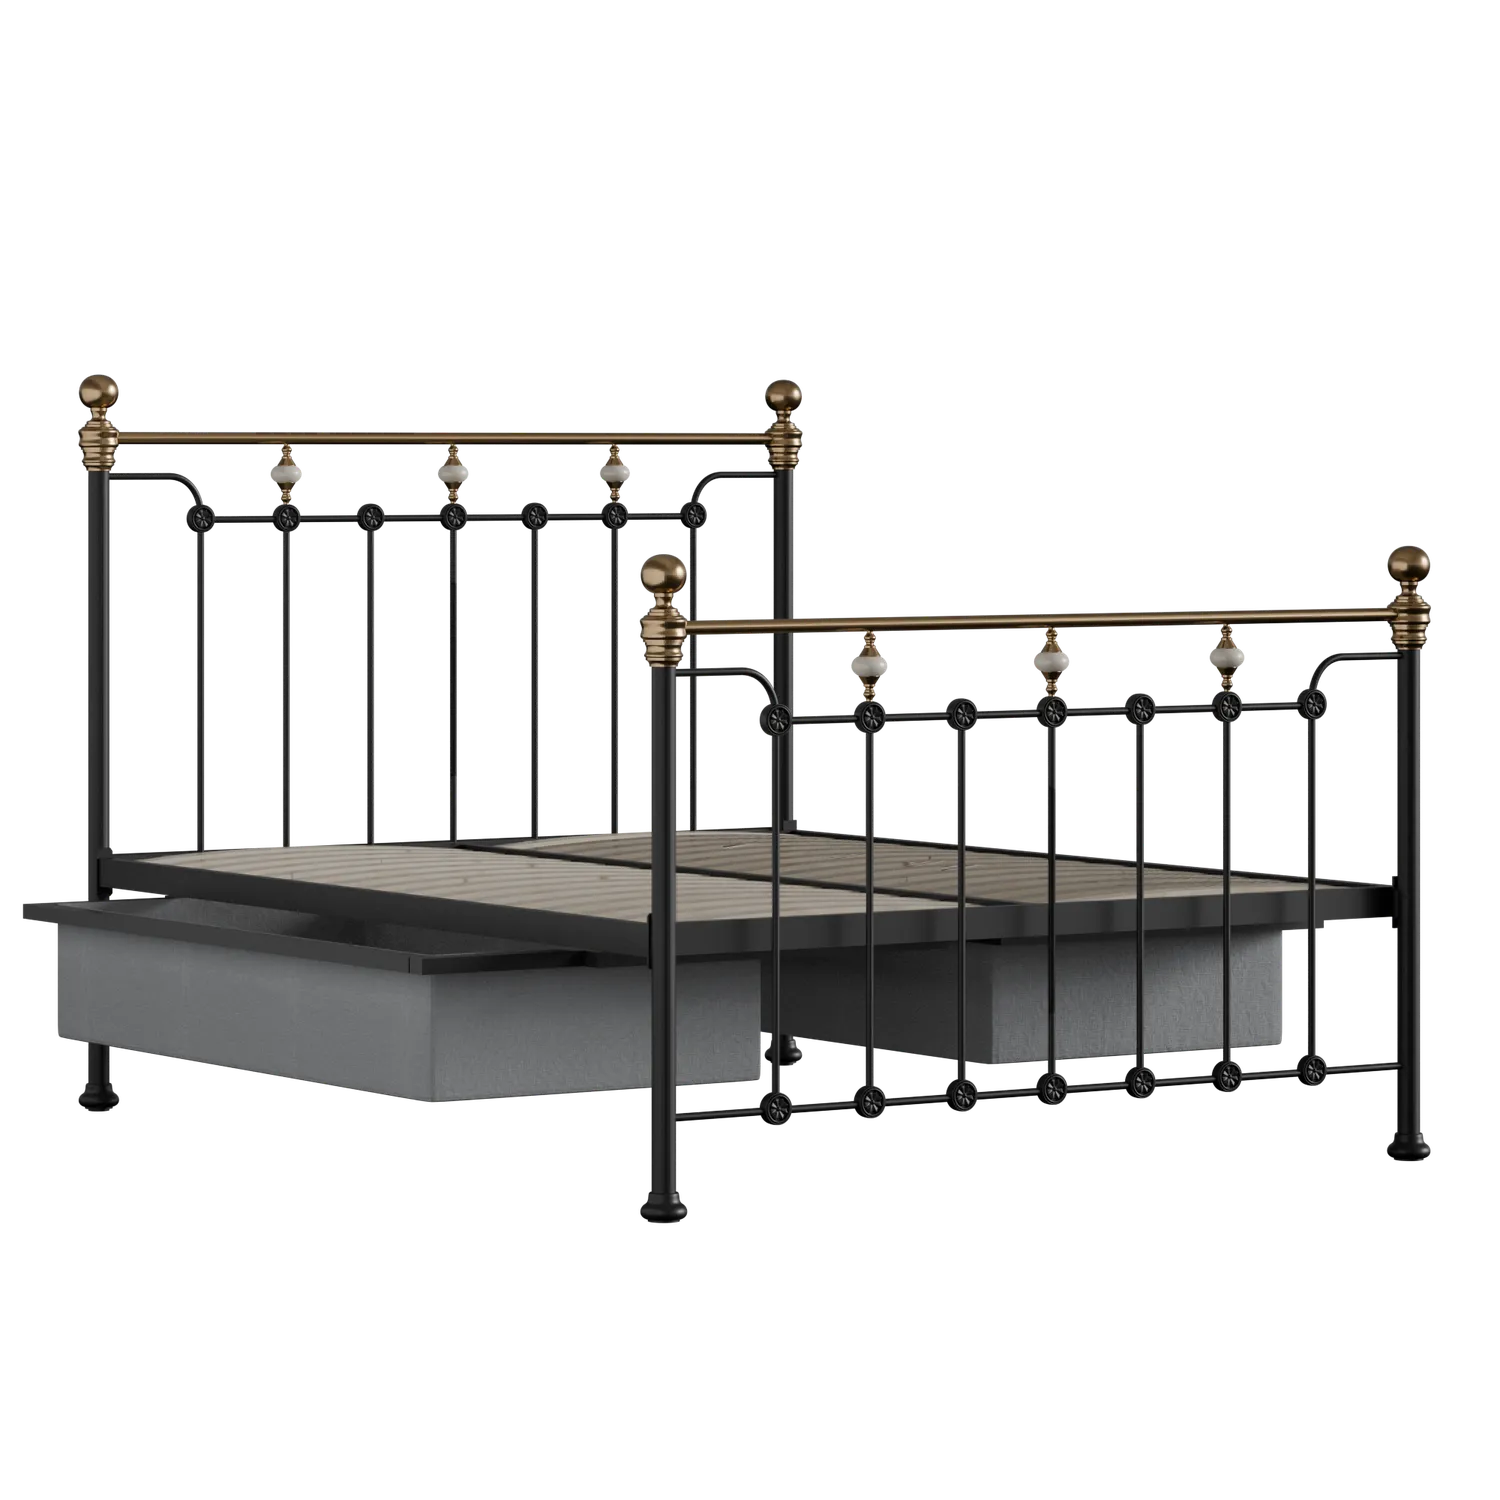 Glenholm iron/metal bed in black with drawers